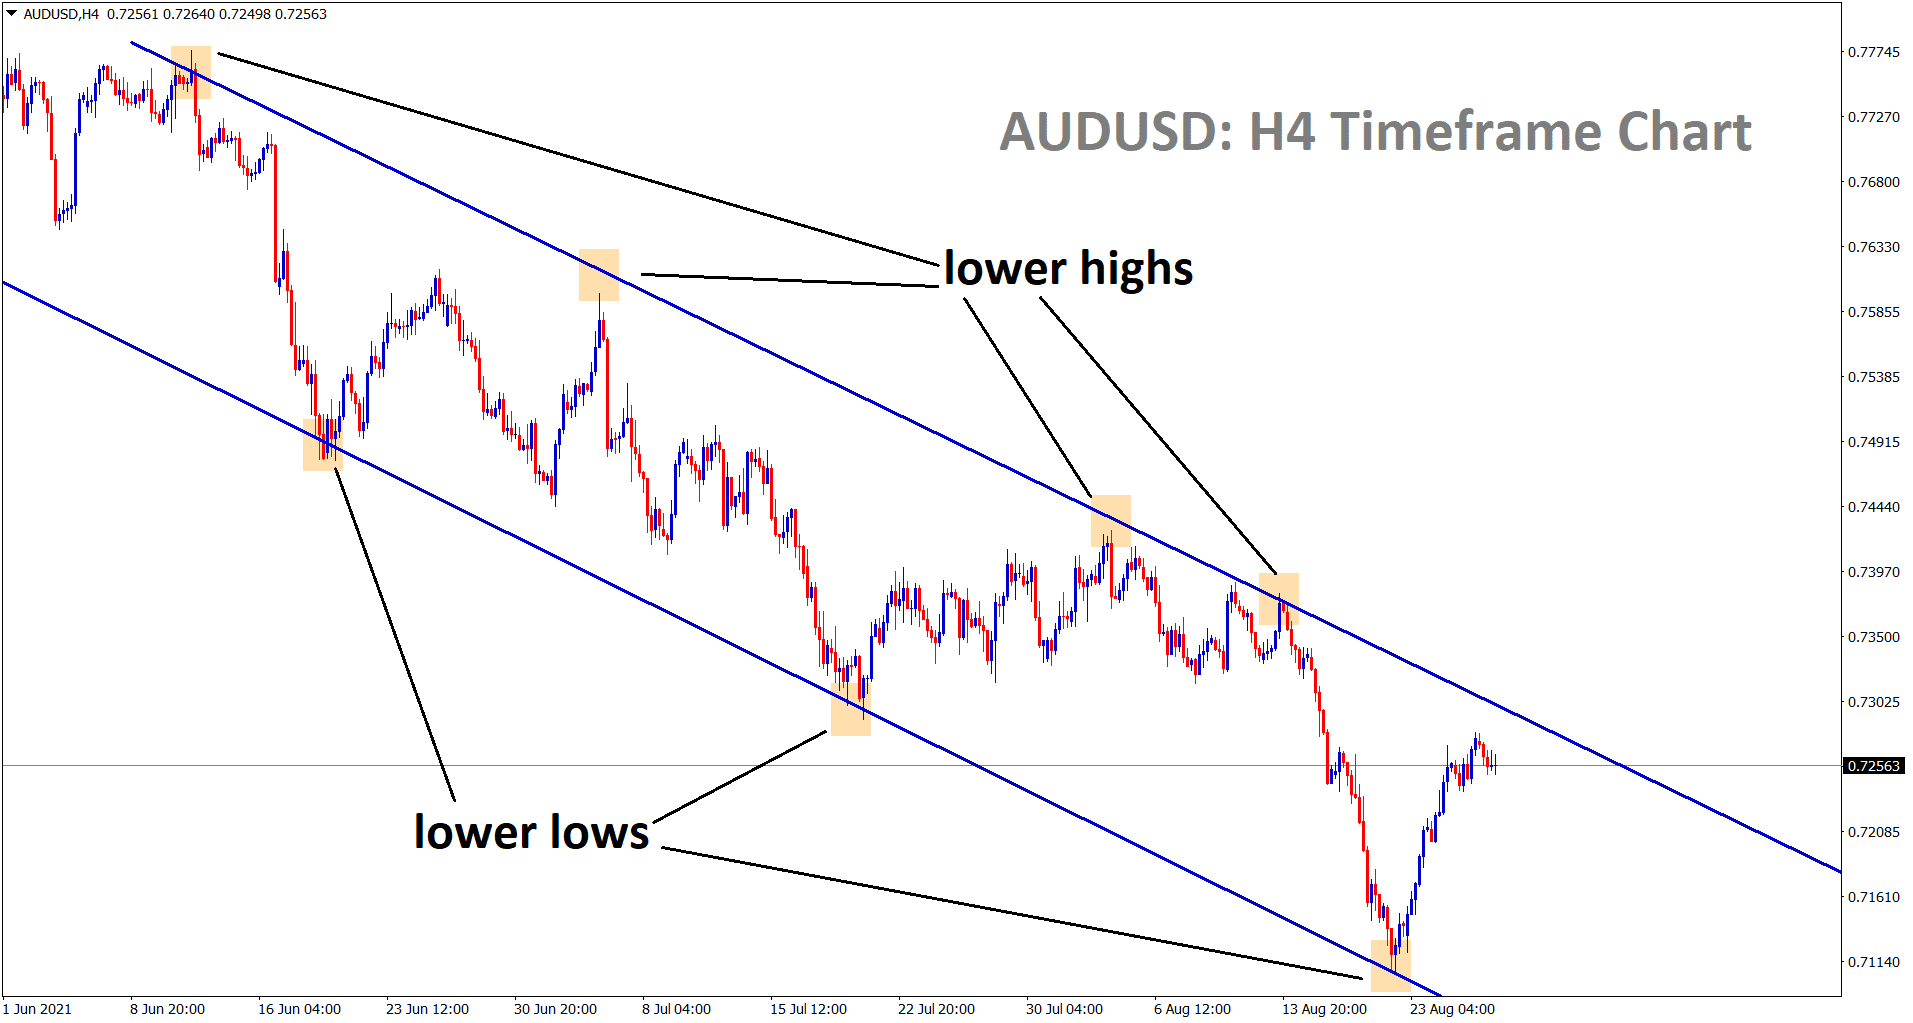 AUDUSD is going to reach the lower high area of the descending channel